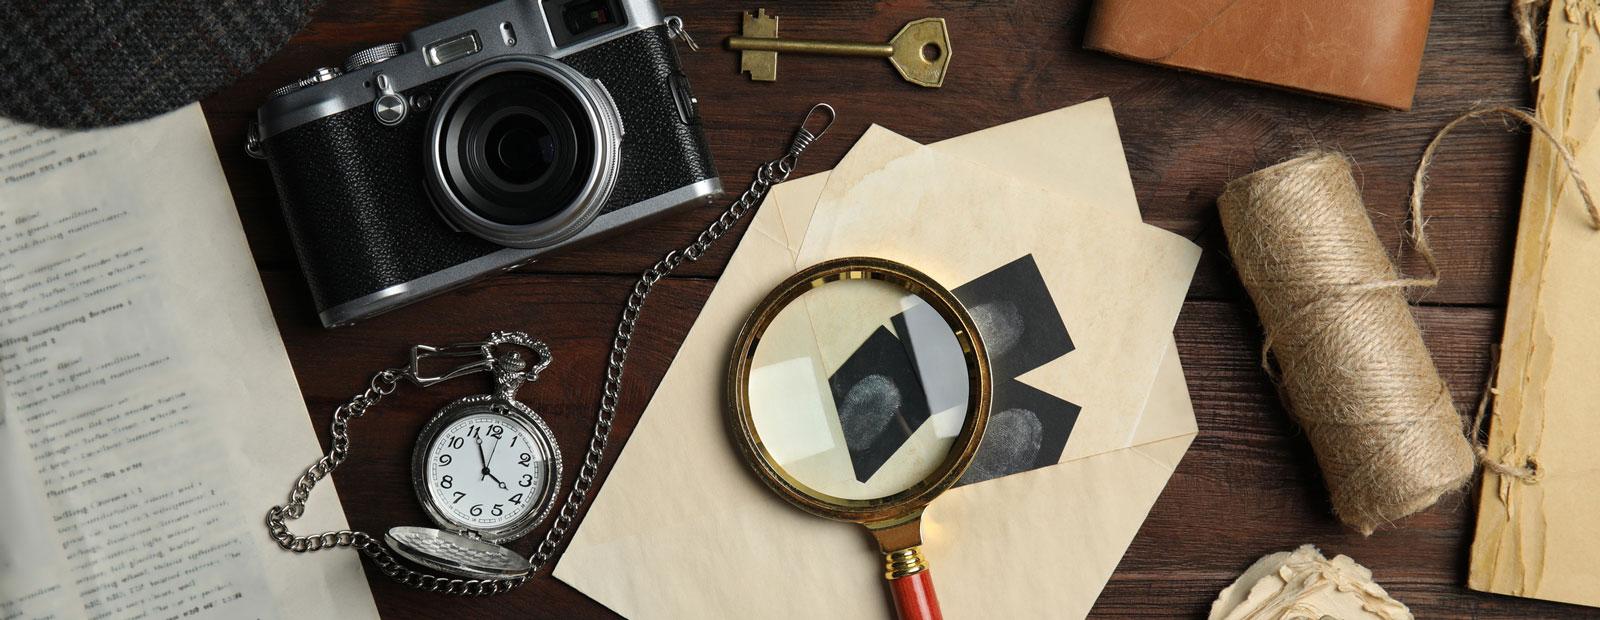 Vintage items on wooden background including a camera, pocket watch, and magnifying glass.